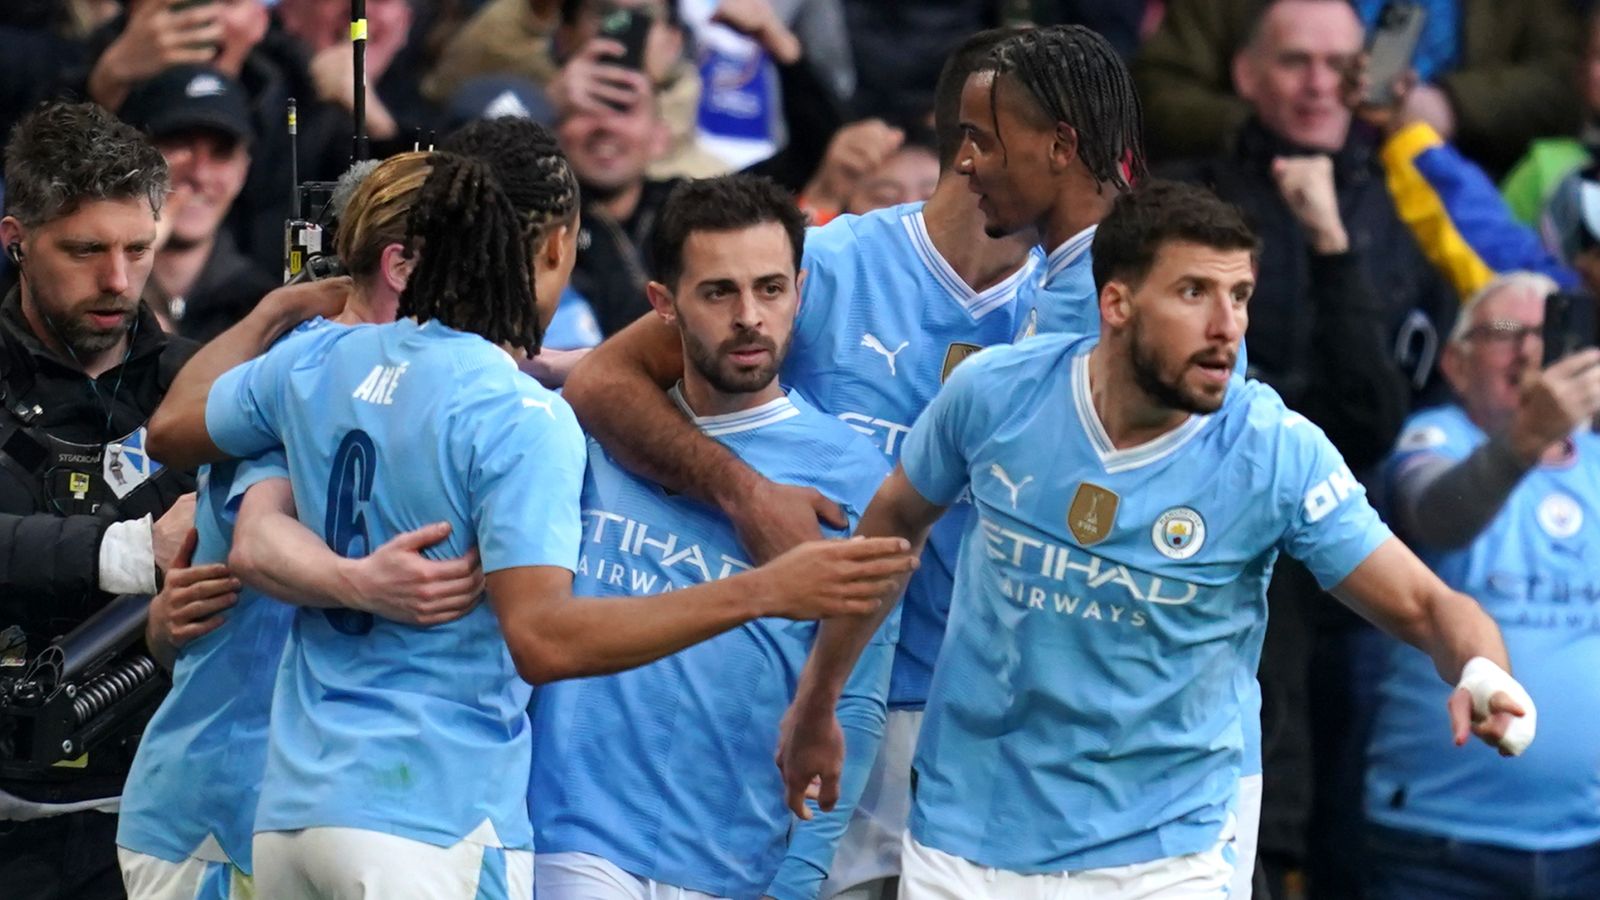 EPL: Title won’t be decided on goal difference after Man City’s win at Tottenham